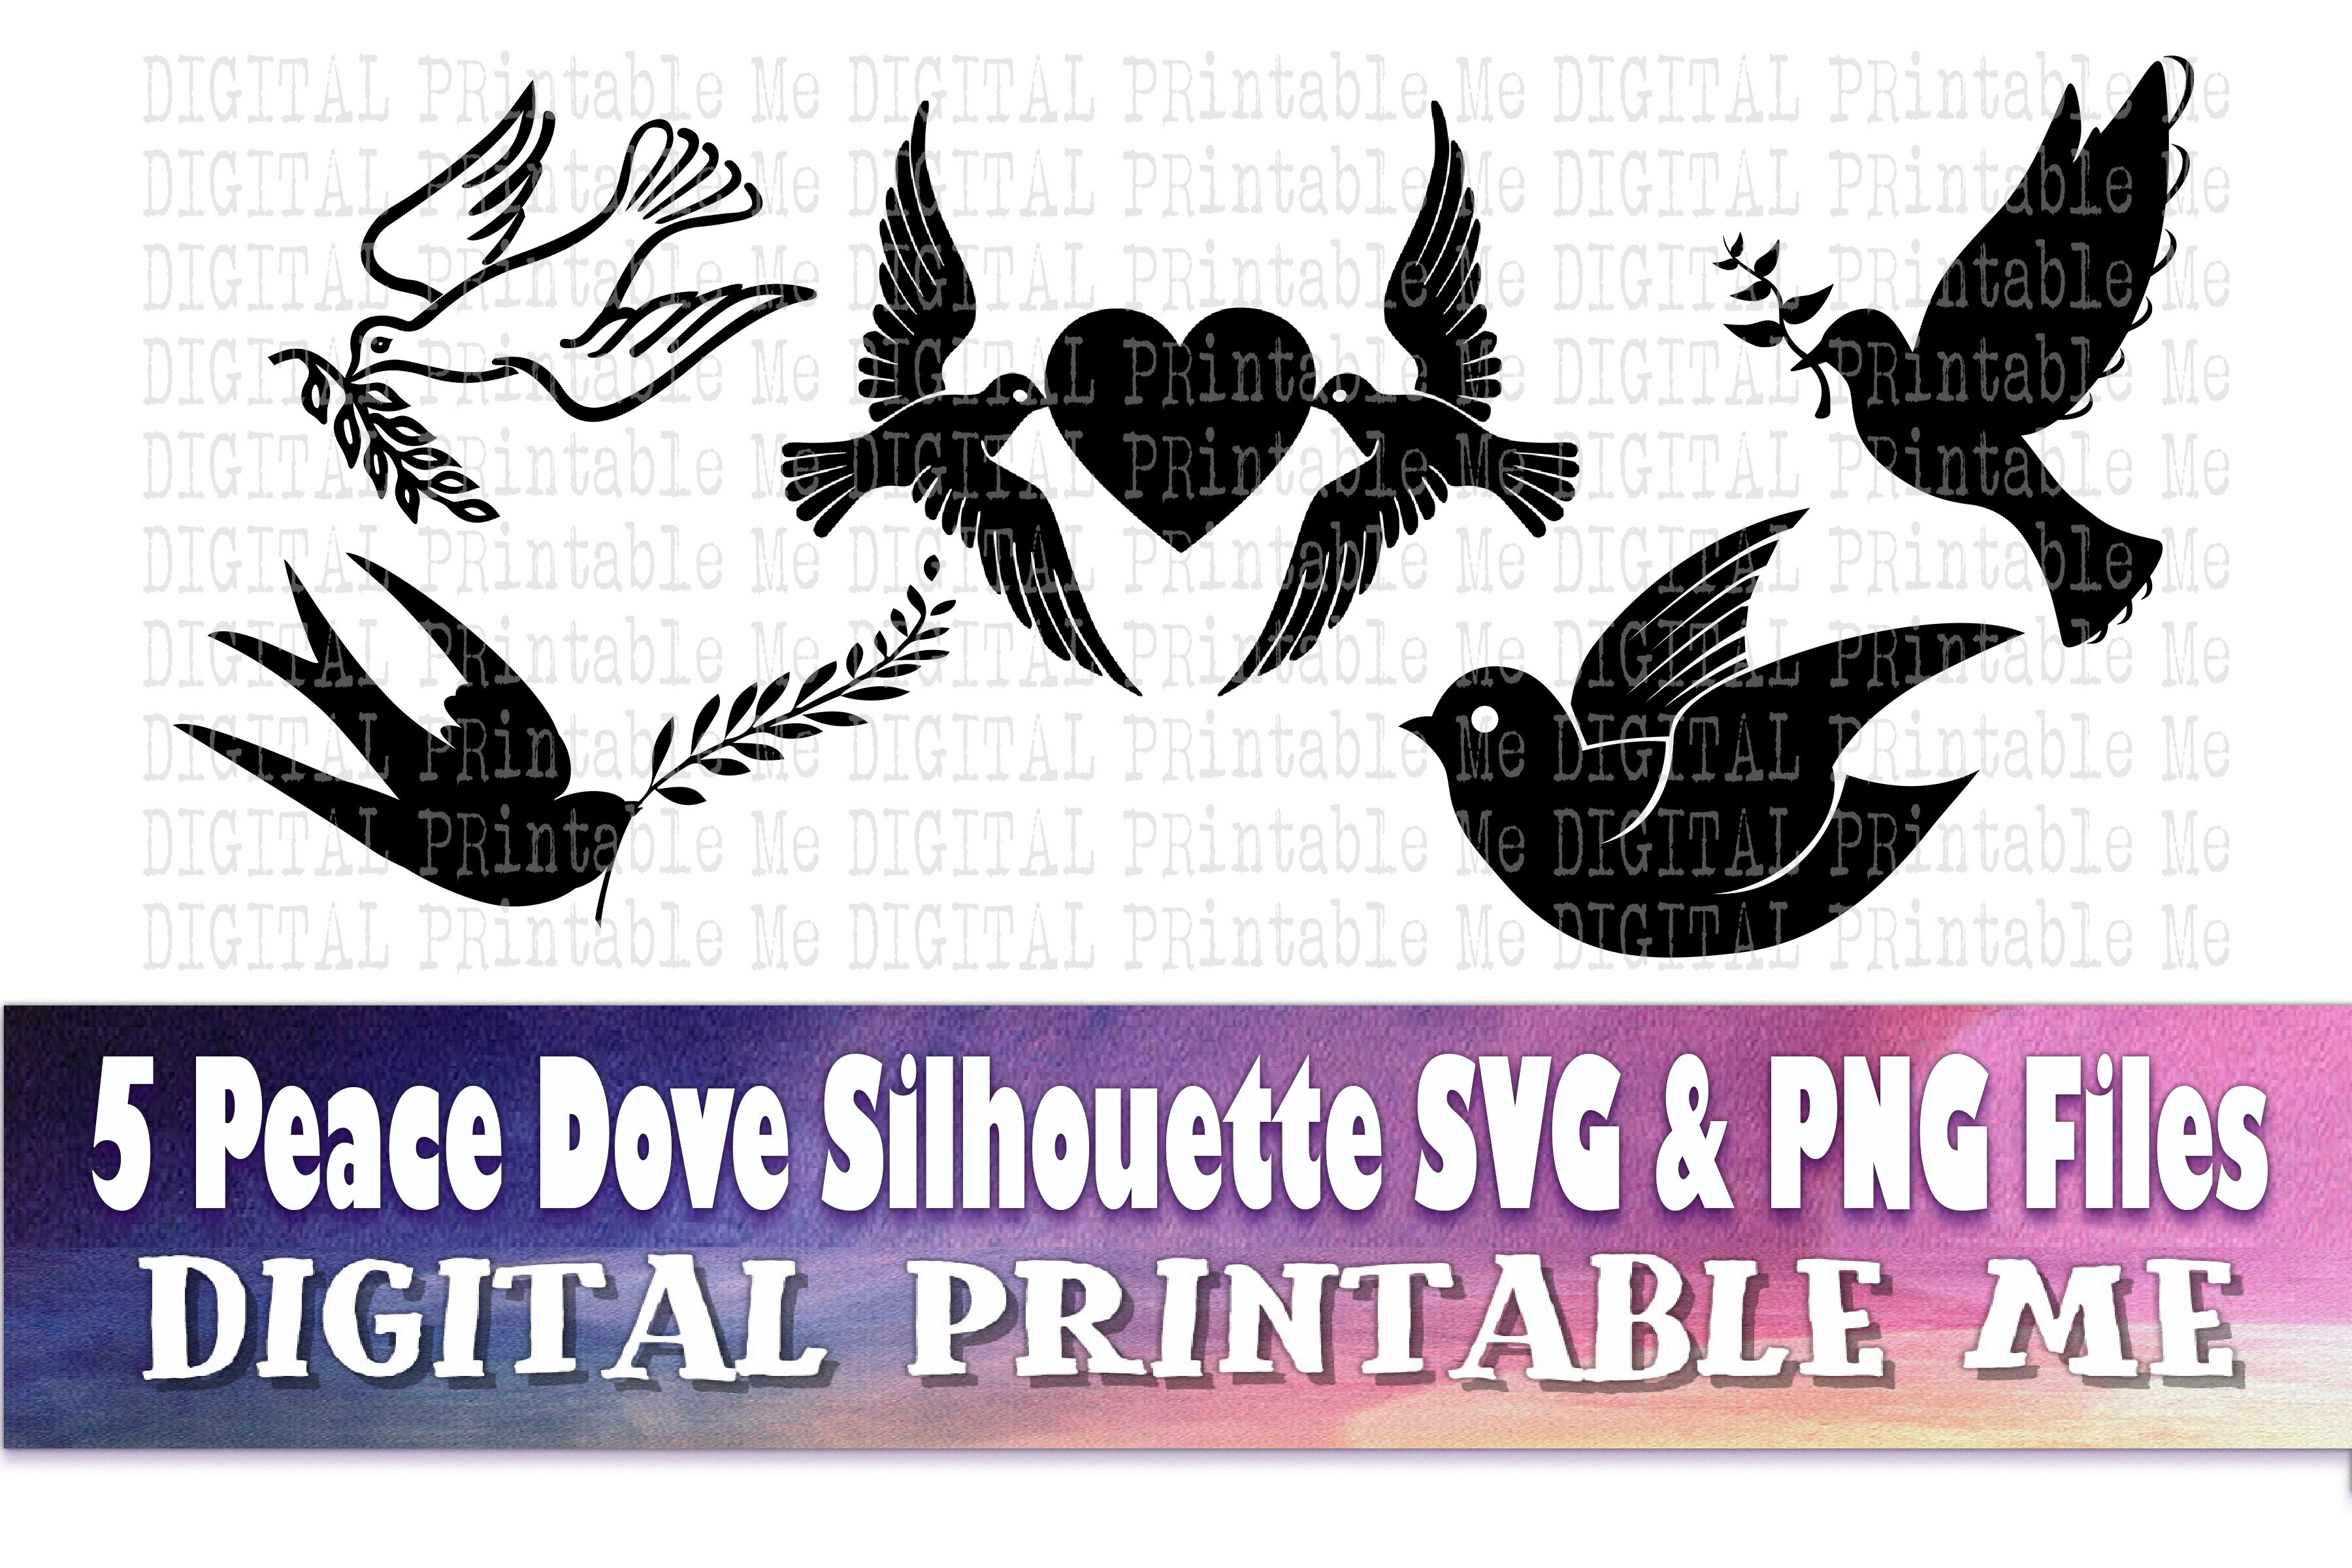 dove silhouette png